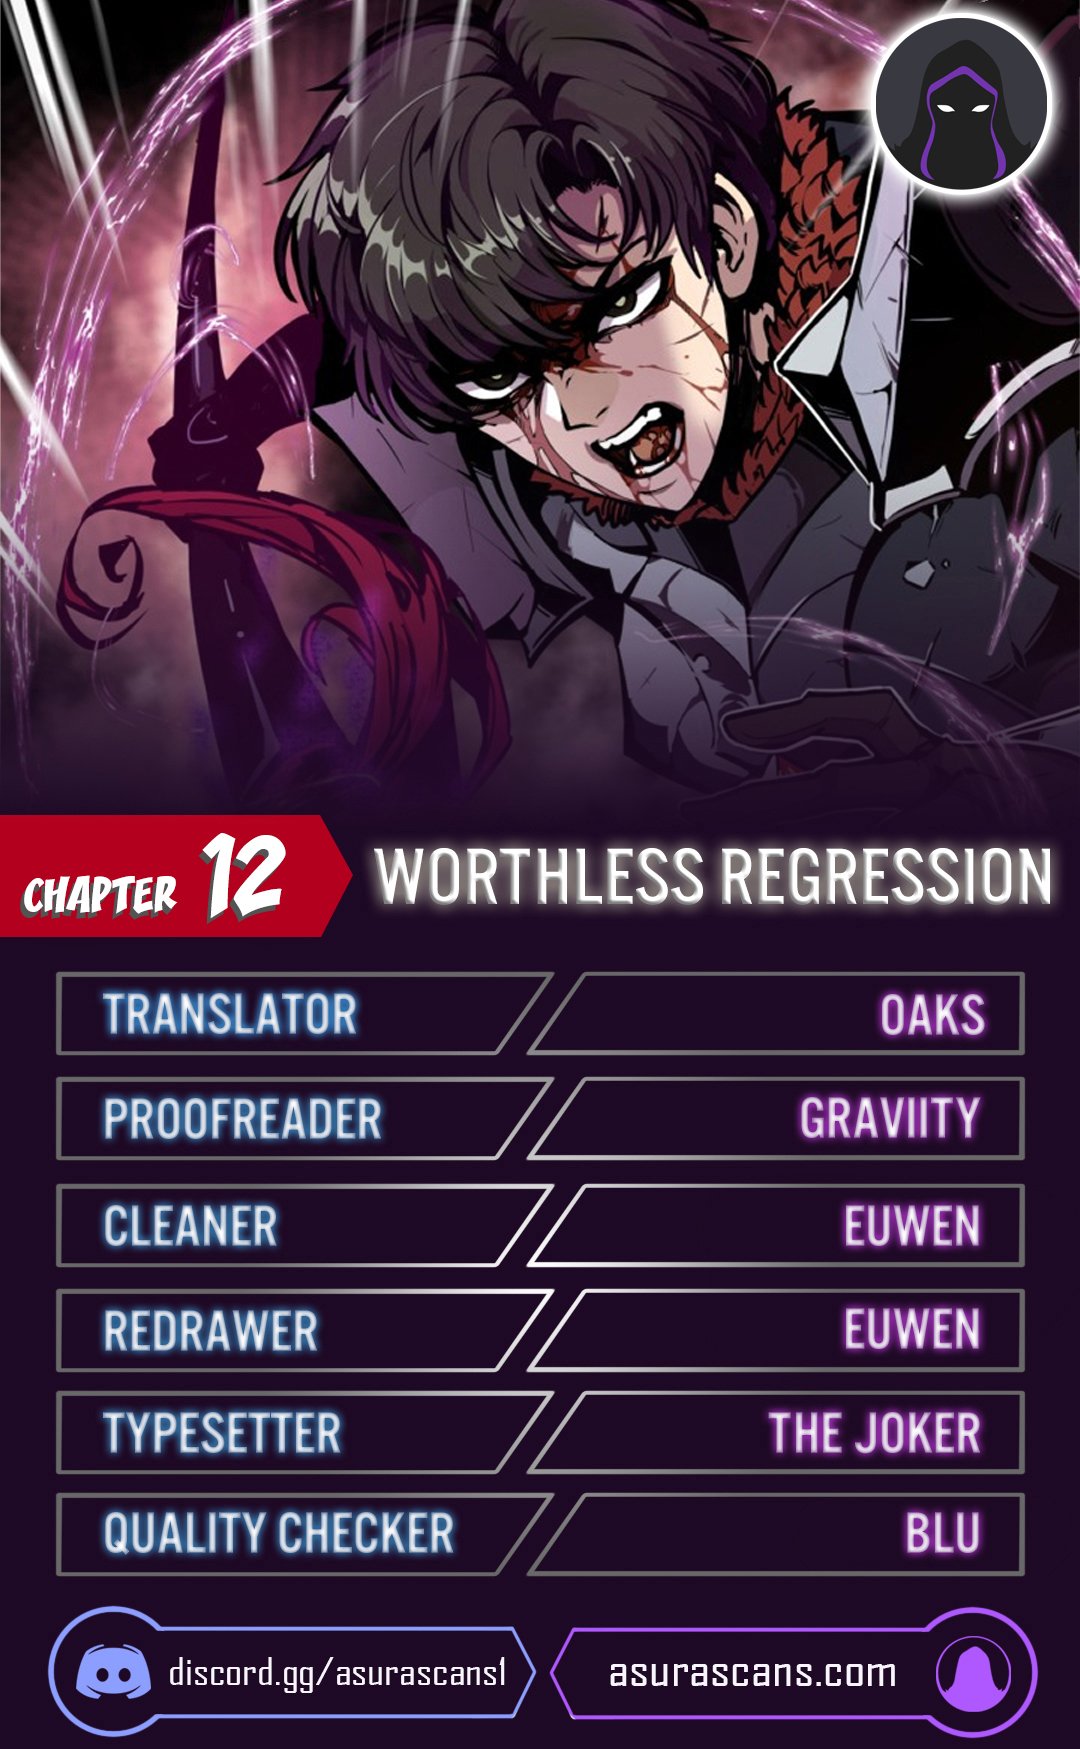 Worthless Regression - Chapter 20450 - Page 1